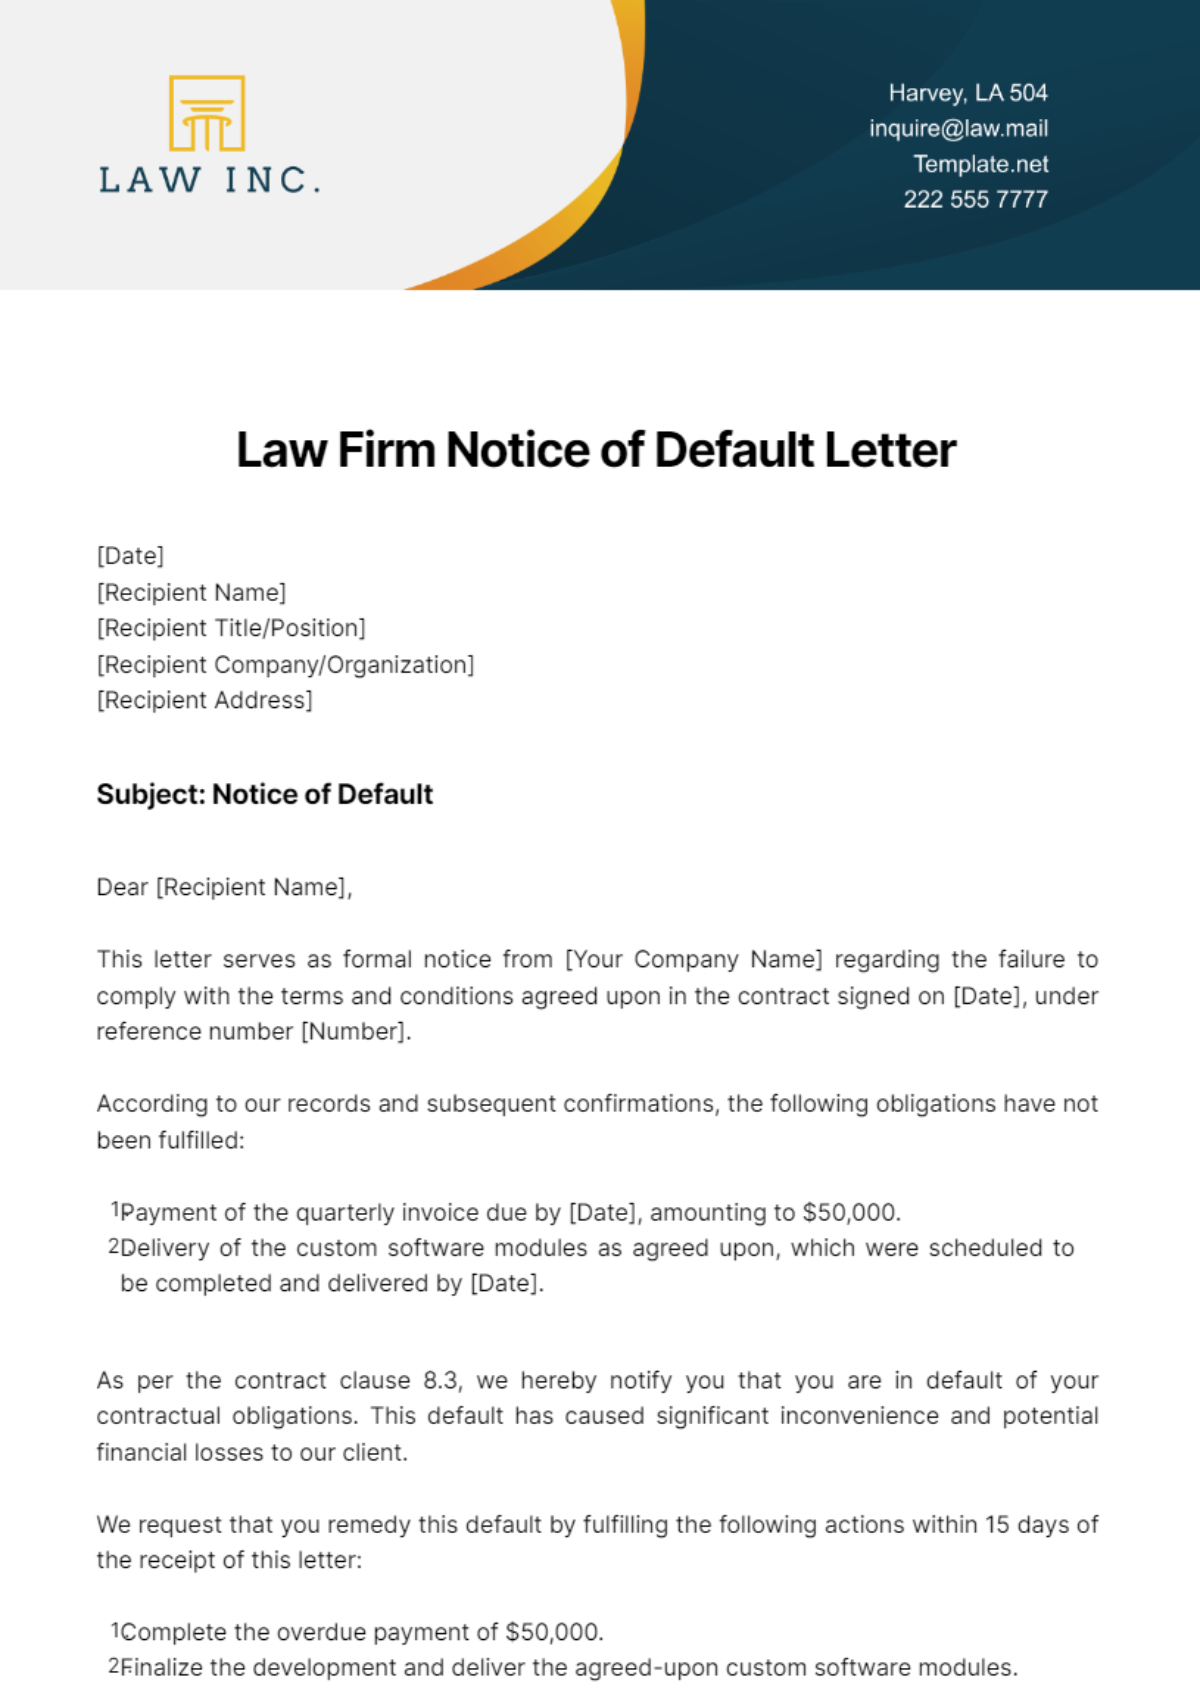 Law Firm Notice of Default Letter Template